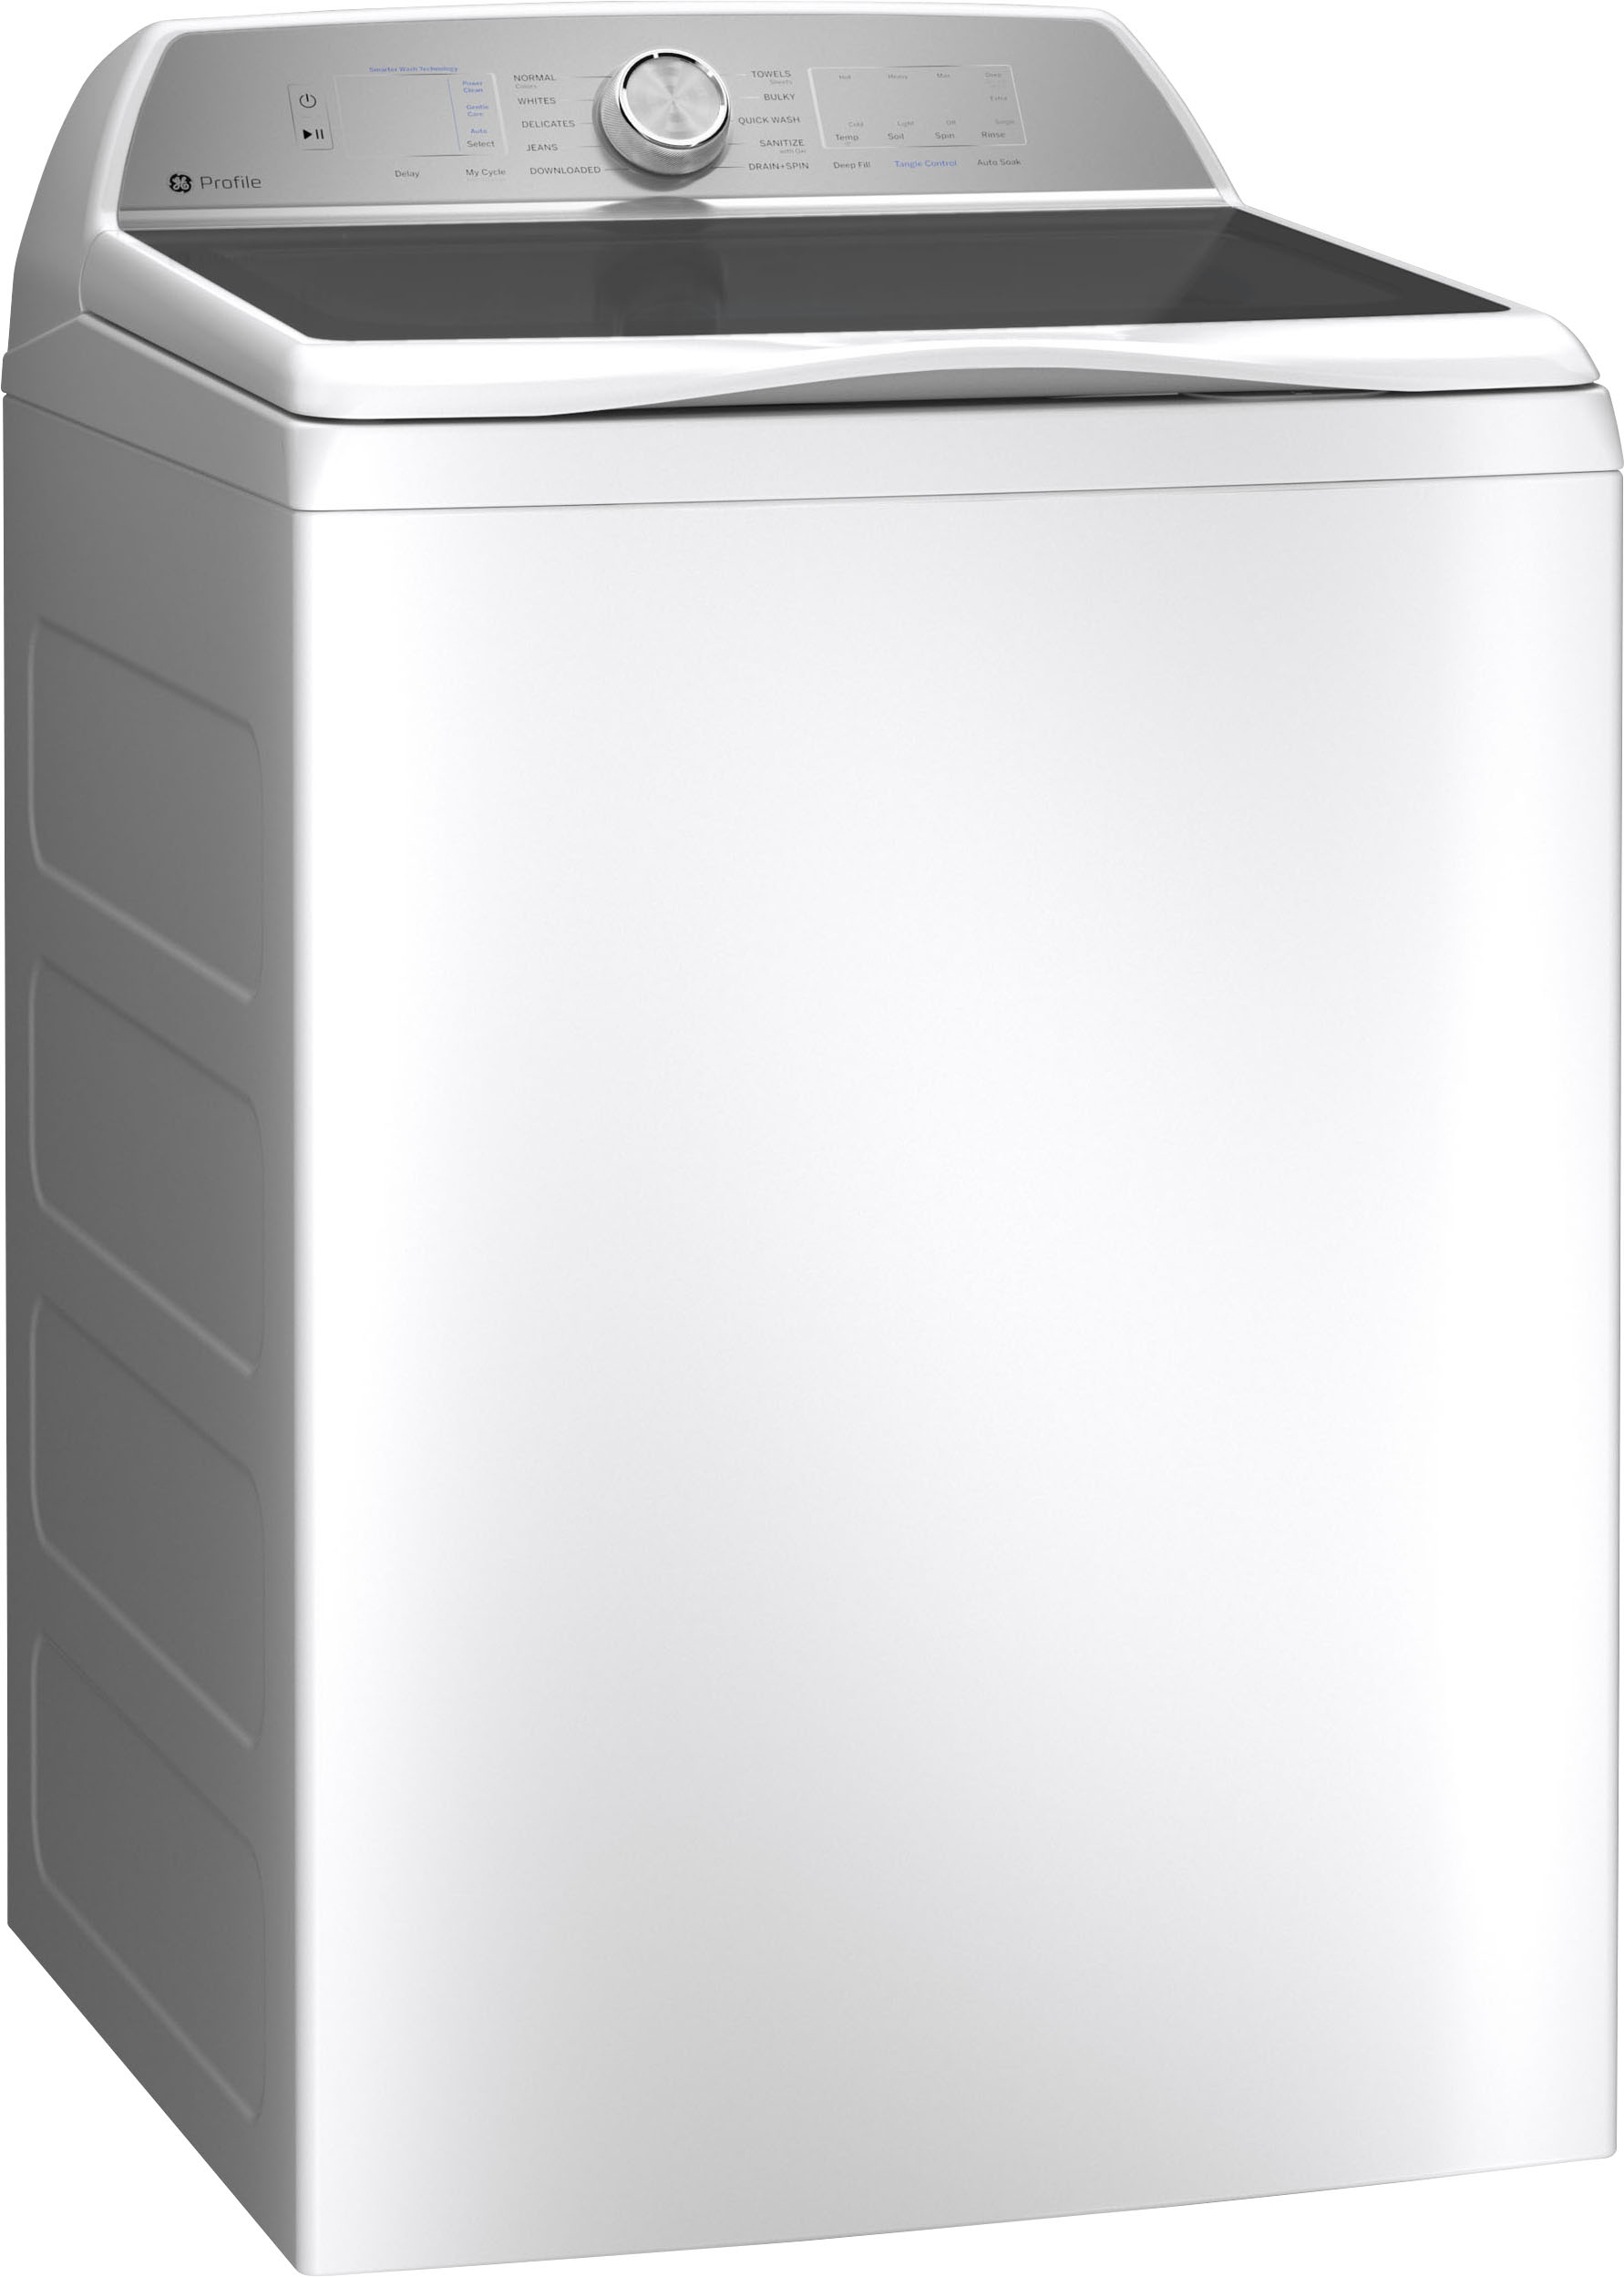 Angle View: GE Profile - 5.0 Cu Ft High Efficiency Smart Top Load Washer with Smarter Wash Technology, Easier Reach & Microban Technology - White